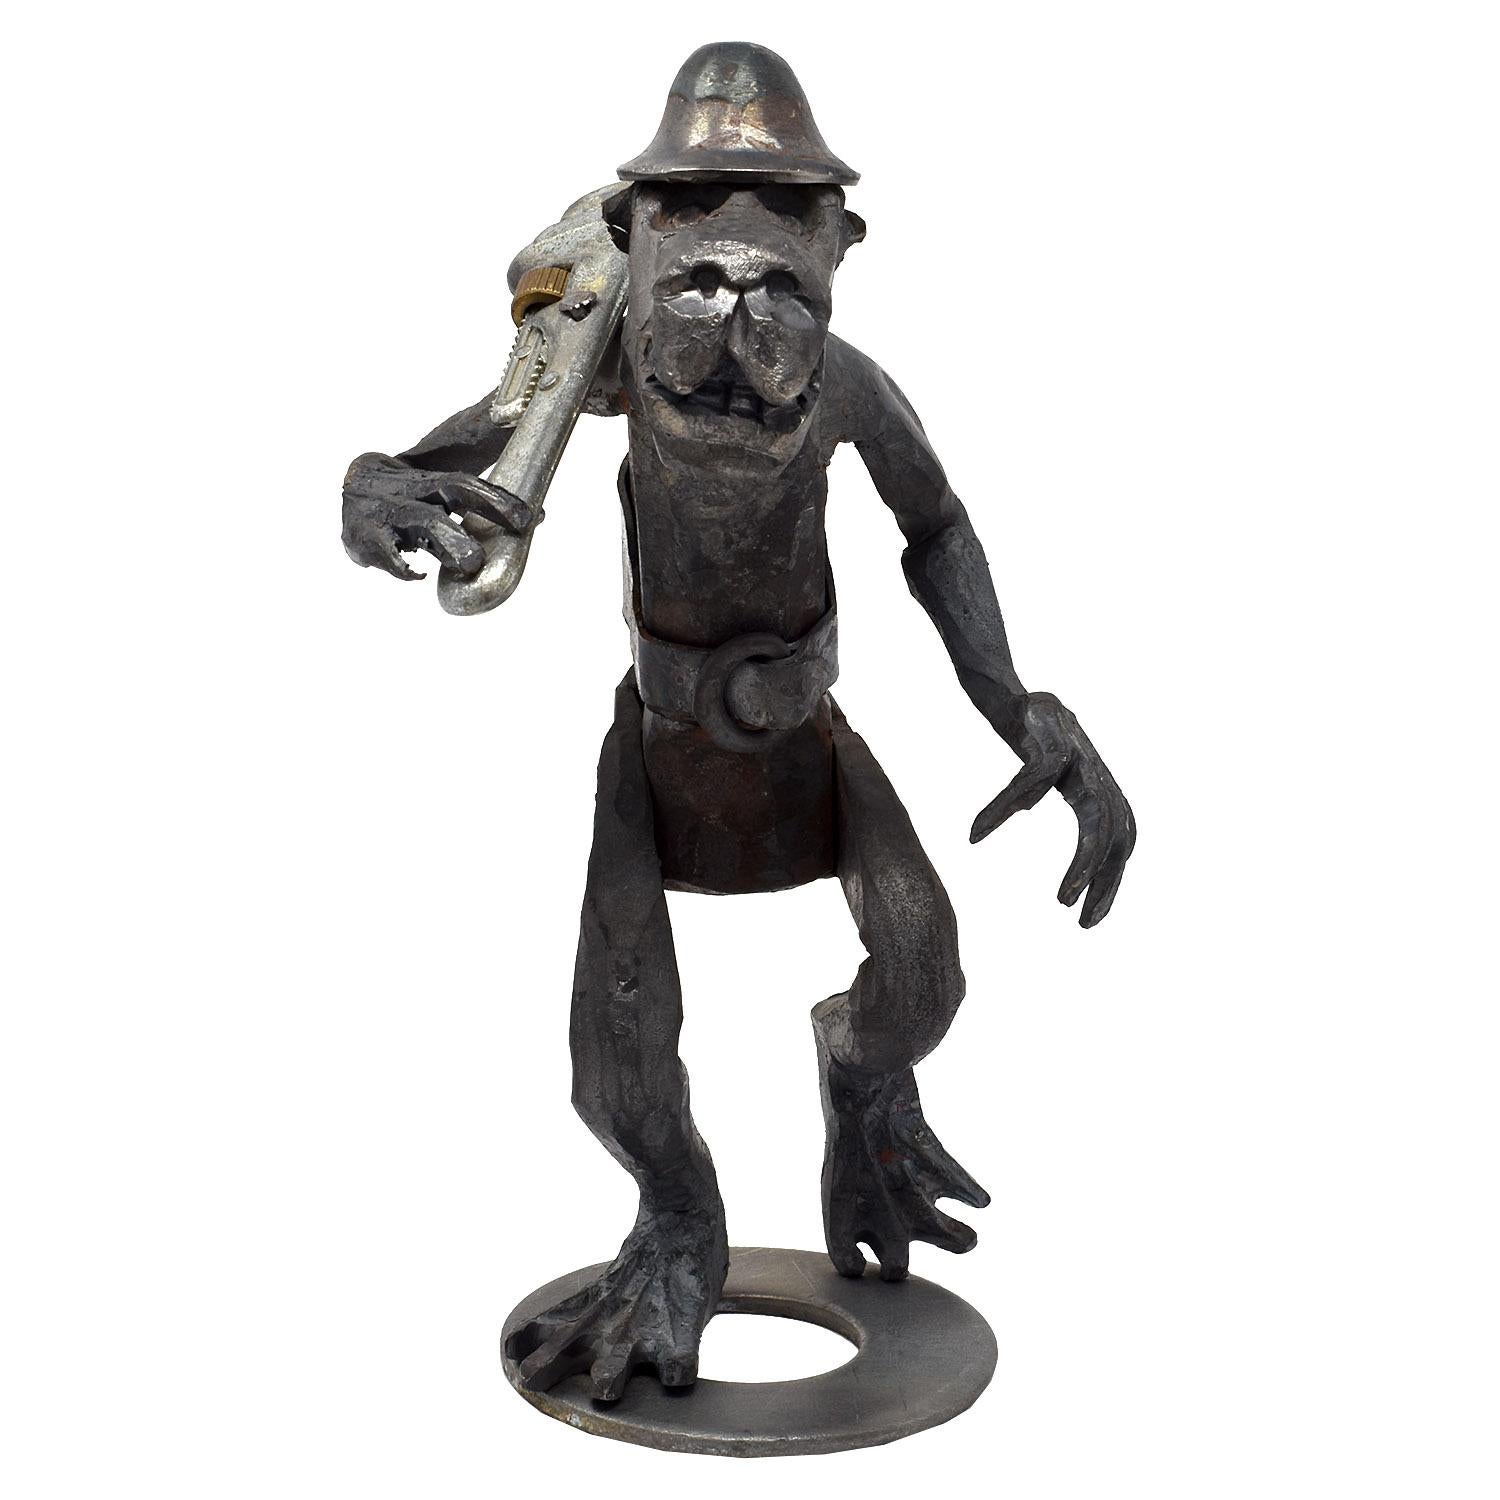 Forged steel

2016

Measures: 8 x 5 x 5 in. / 20 x 13 x 13 cm

Hand crafted by William Roan, the blacksmith famous for making the original Bay Bridge Troll. About this piece, he writes “Casually walks to its next assignment.”